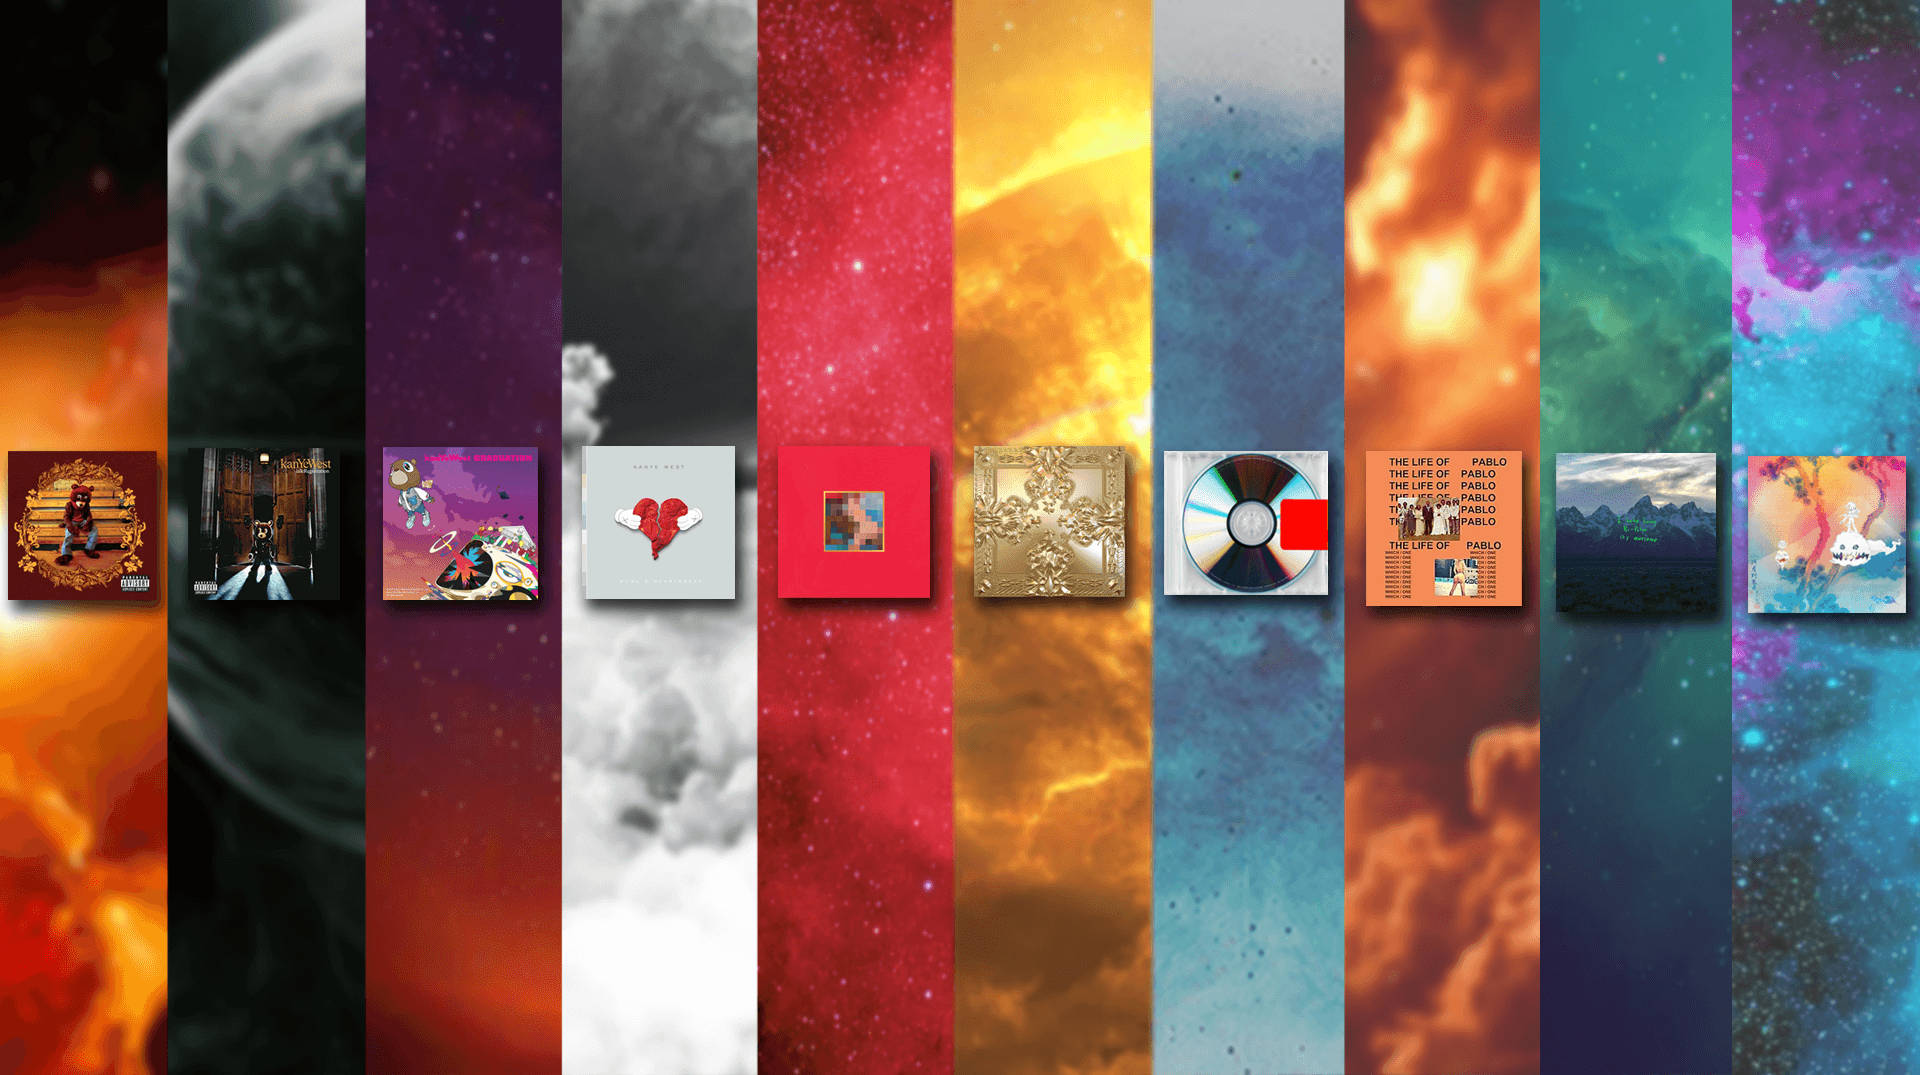 Phone with all 10 albums 19201080 resolution  Kanye Kanye West Album  HD phone wallpaper  Pxfuel